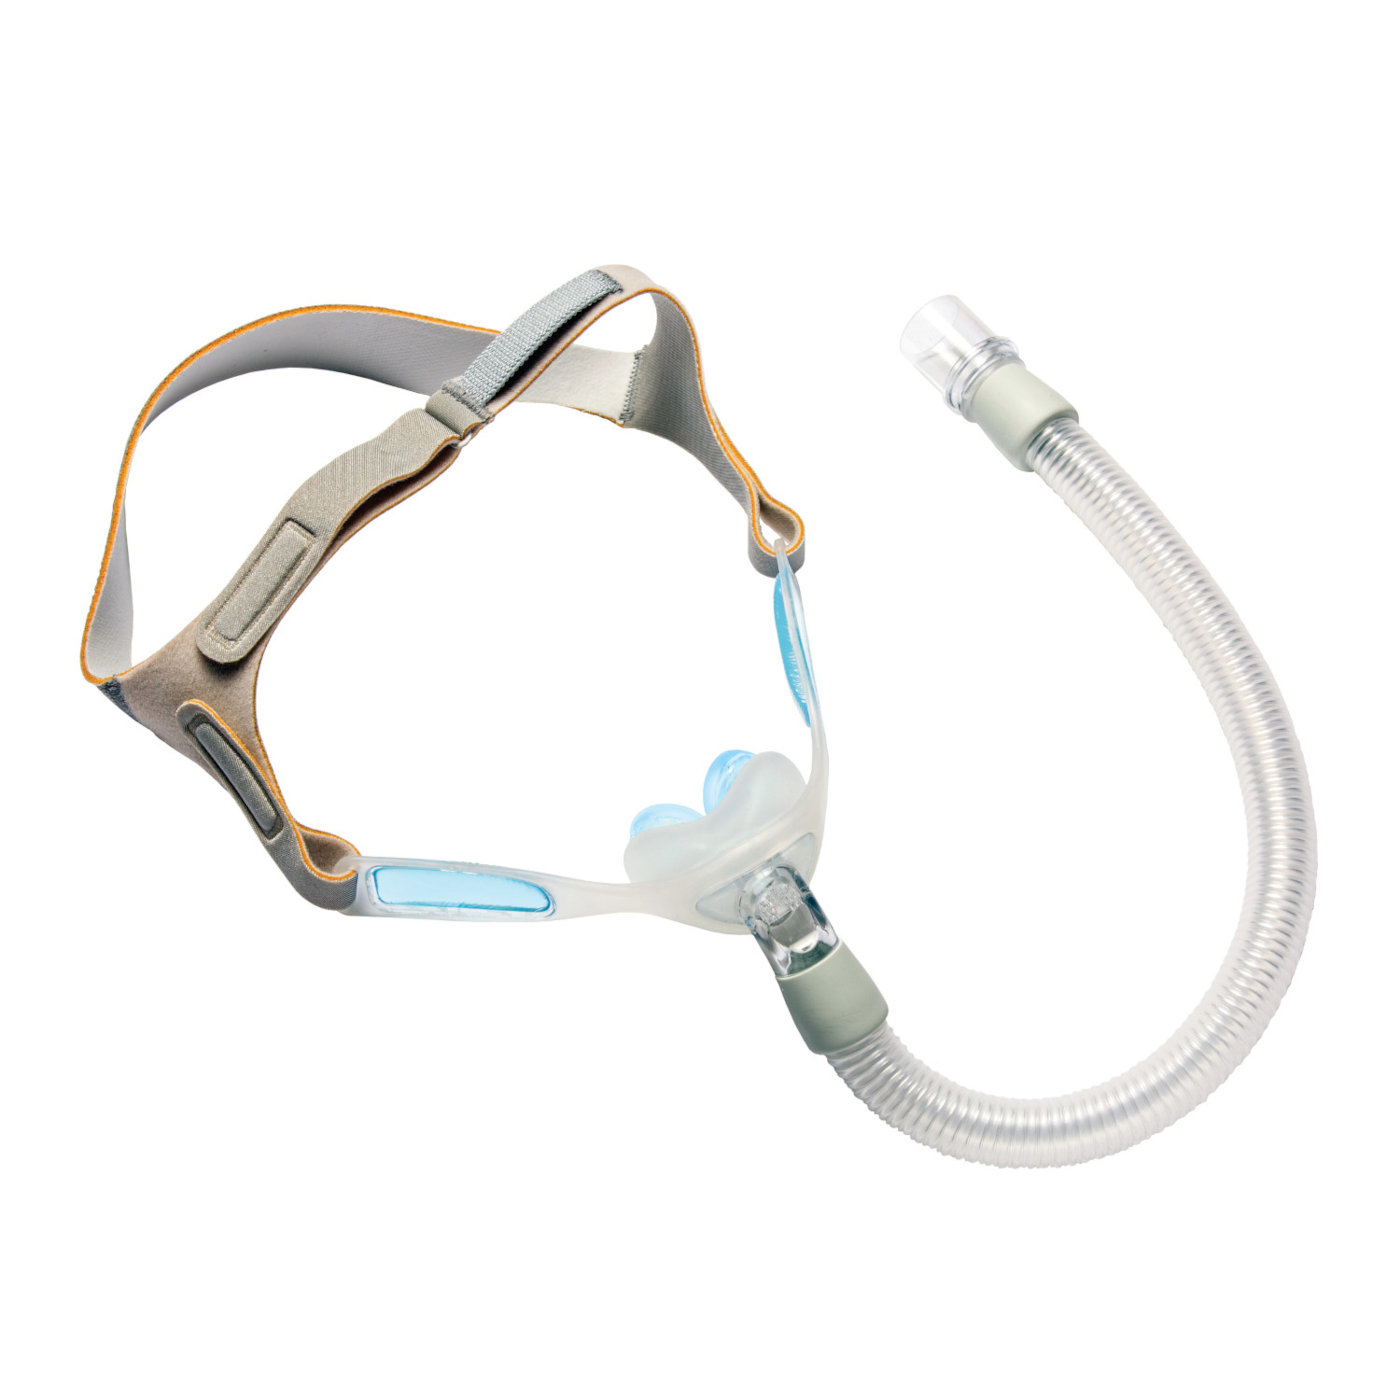 Philips Nuance Pro Nasal Pillow CPAP Mask